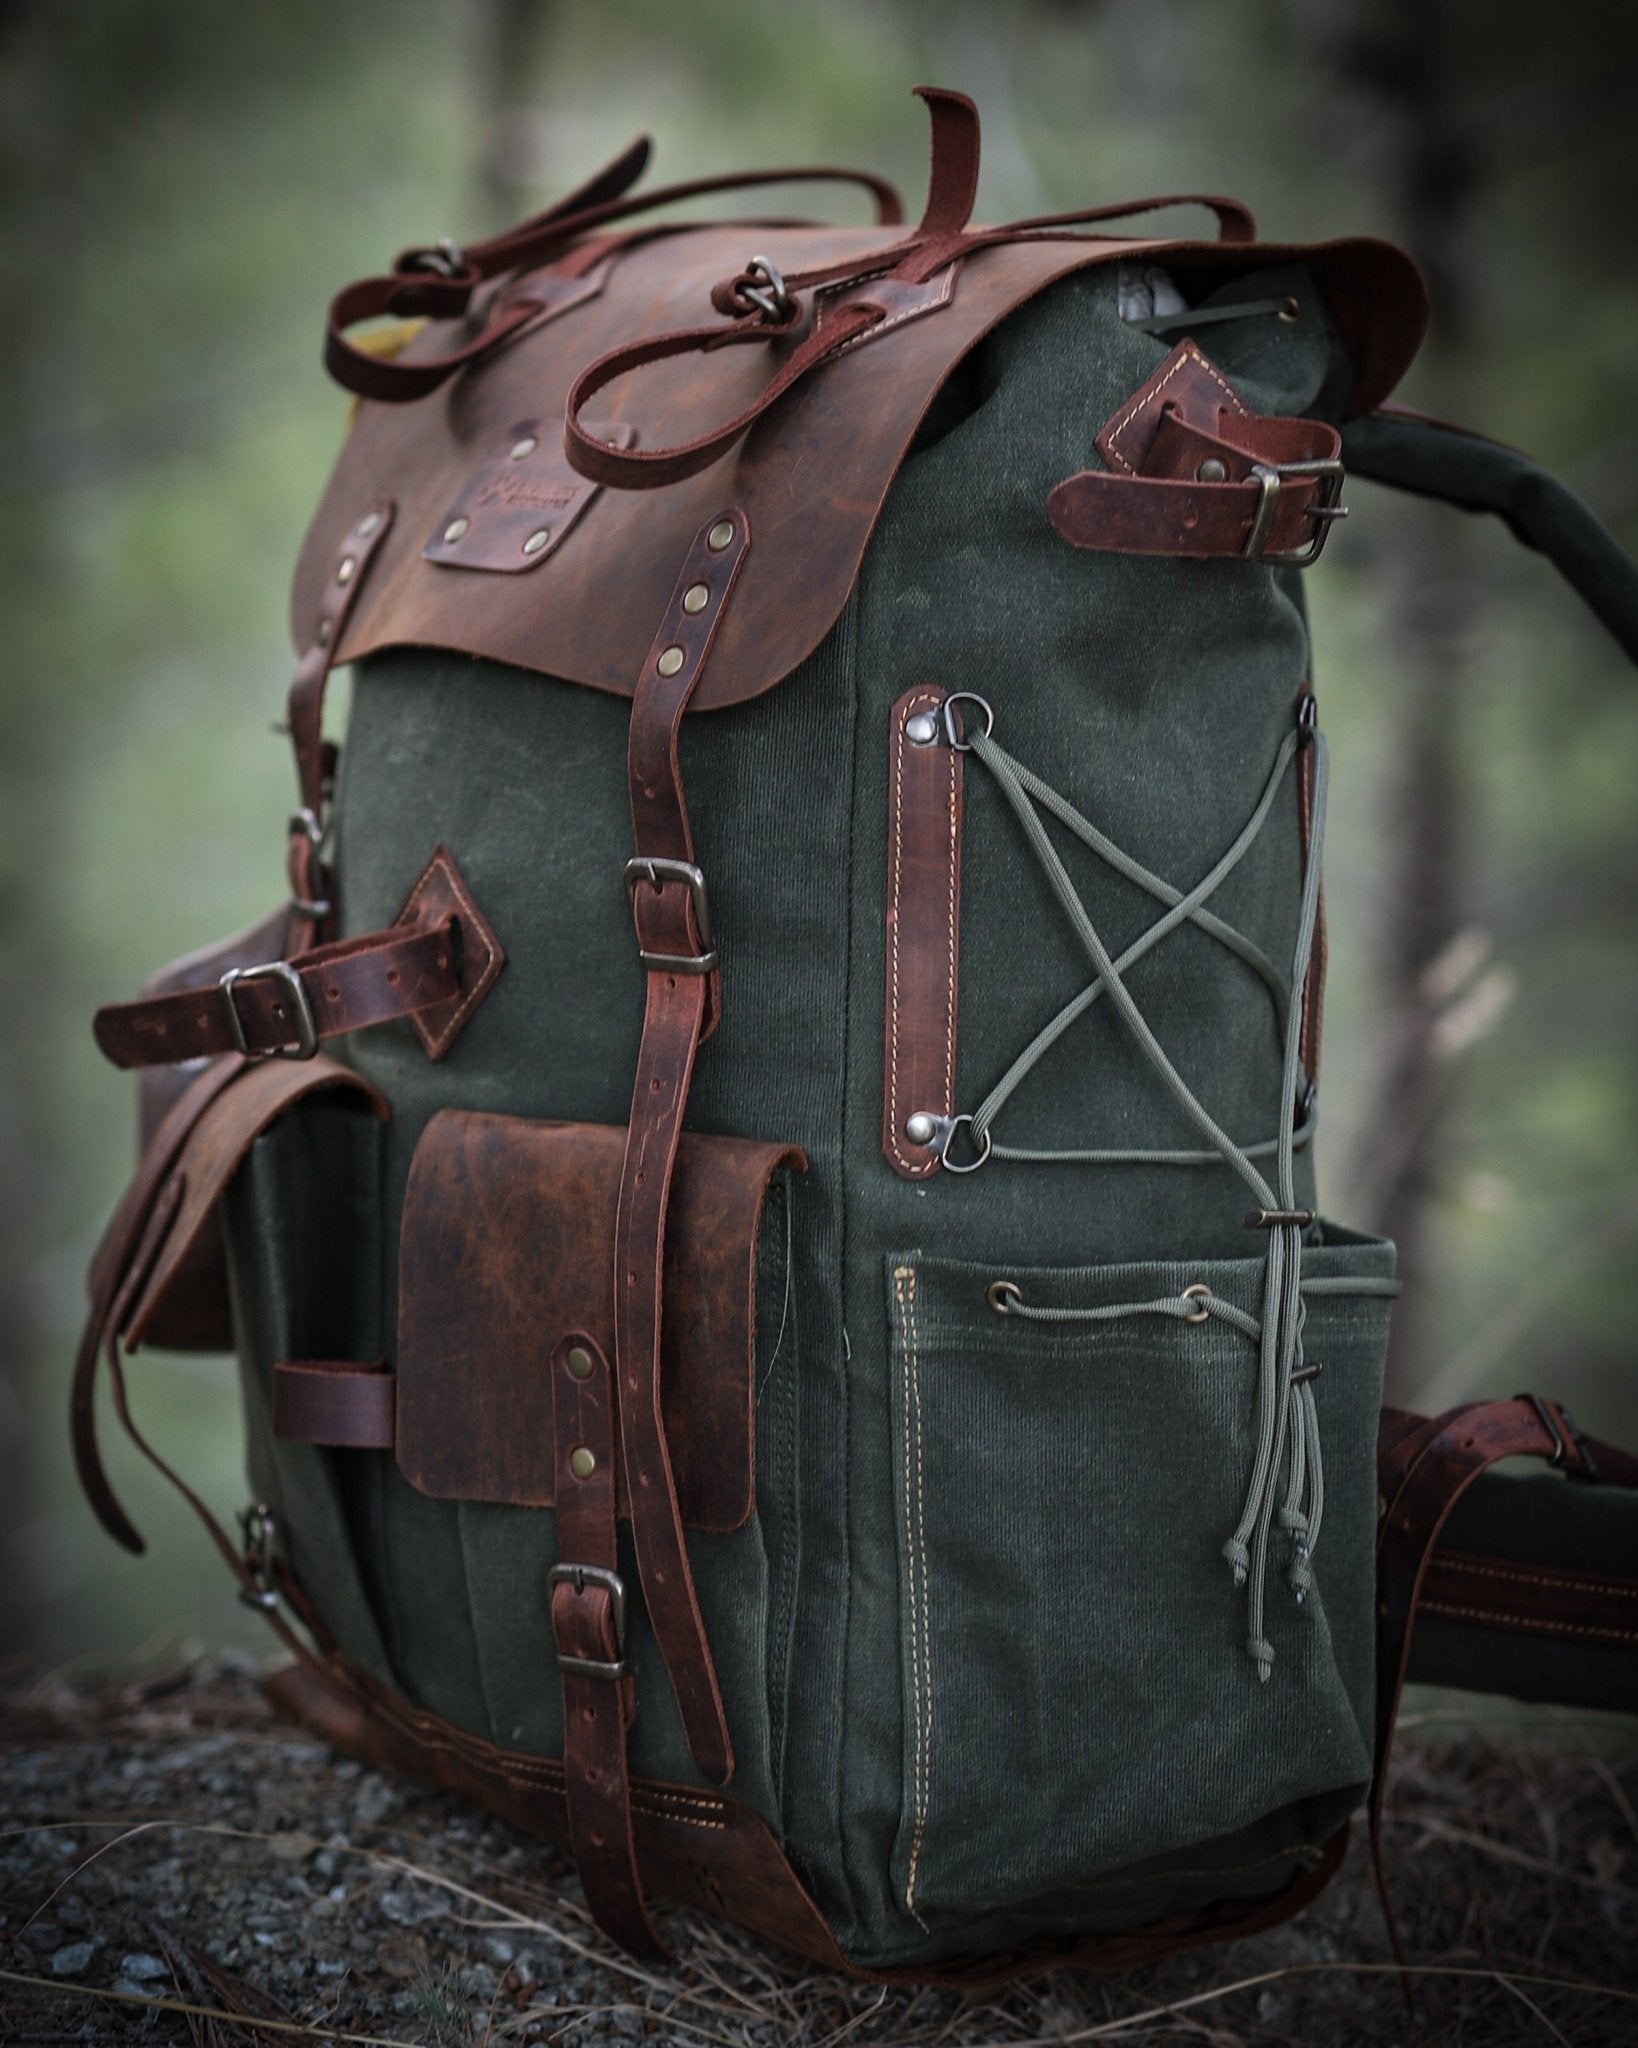 Backpack medium size rucksack in waxed canvas, with leather front